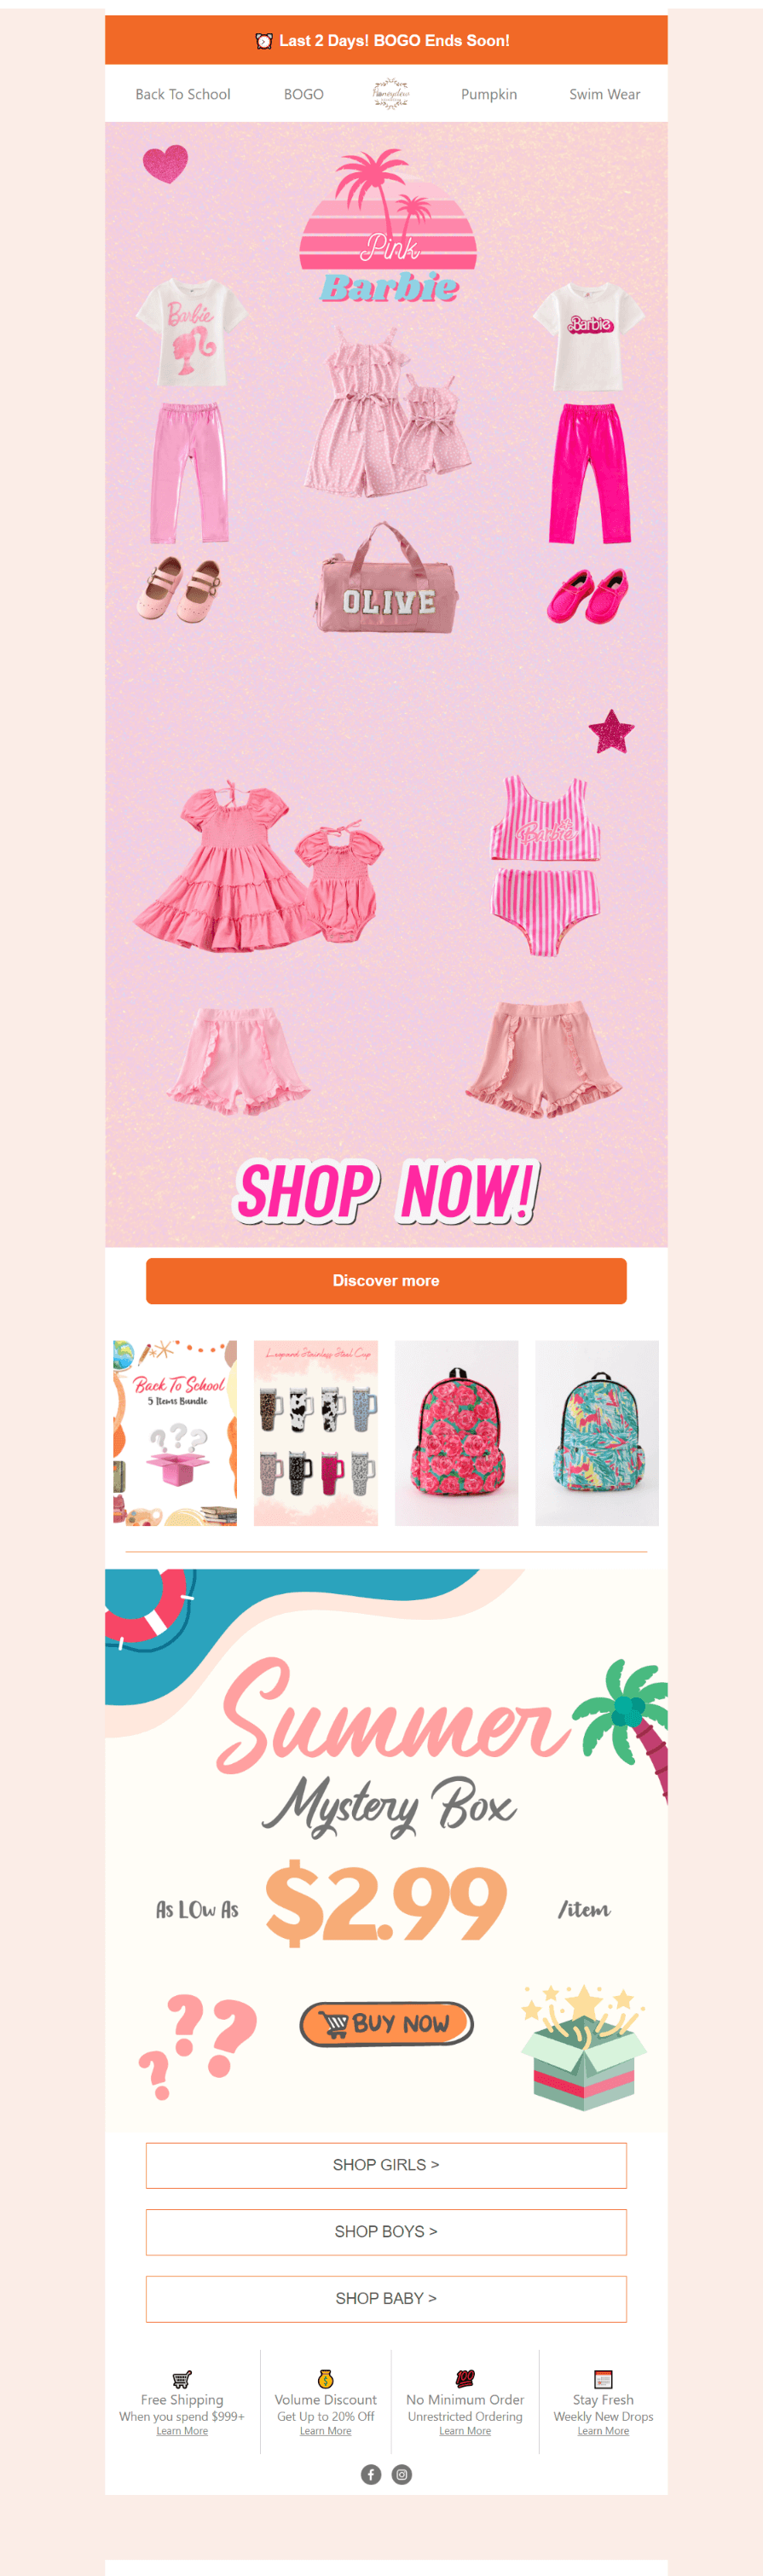 Email from Honeydew USA that promotes a selection of pink clothes and Barbie merch